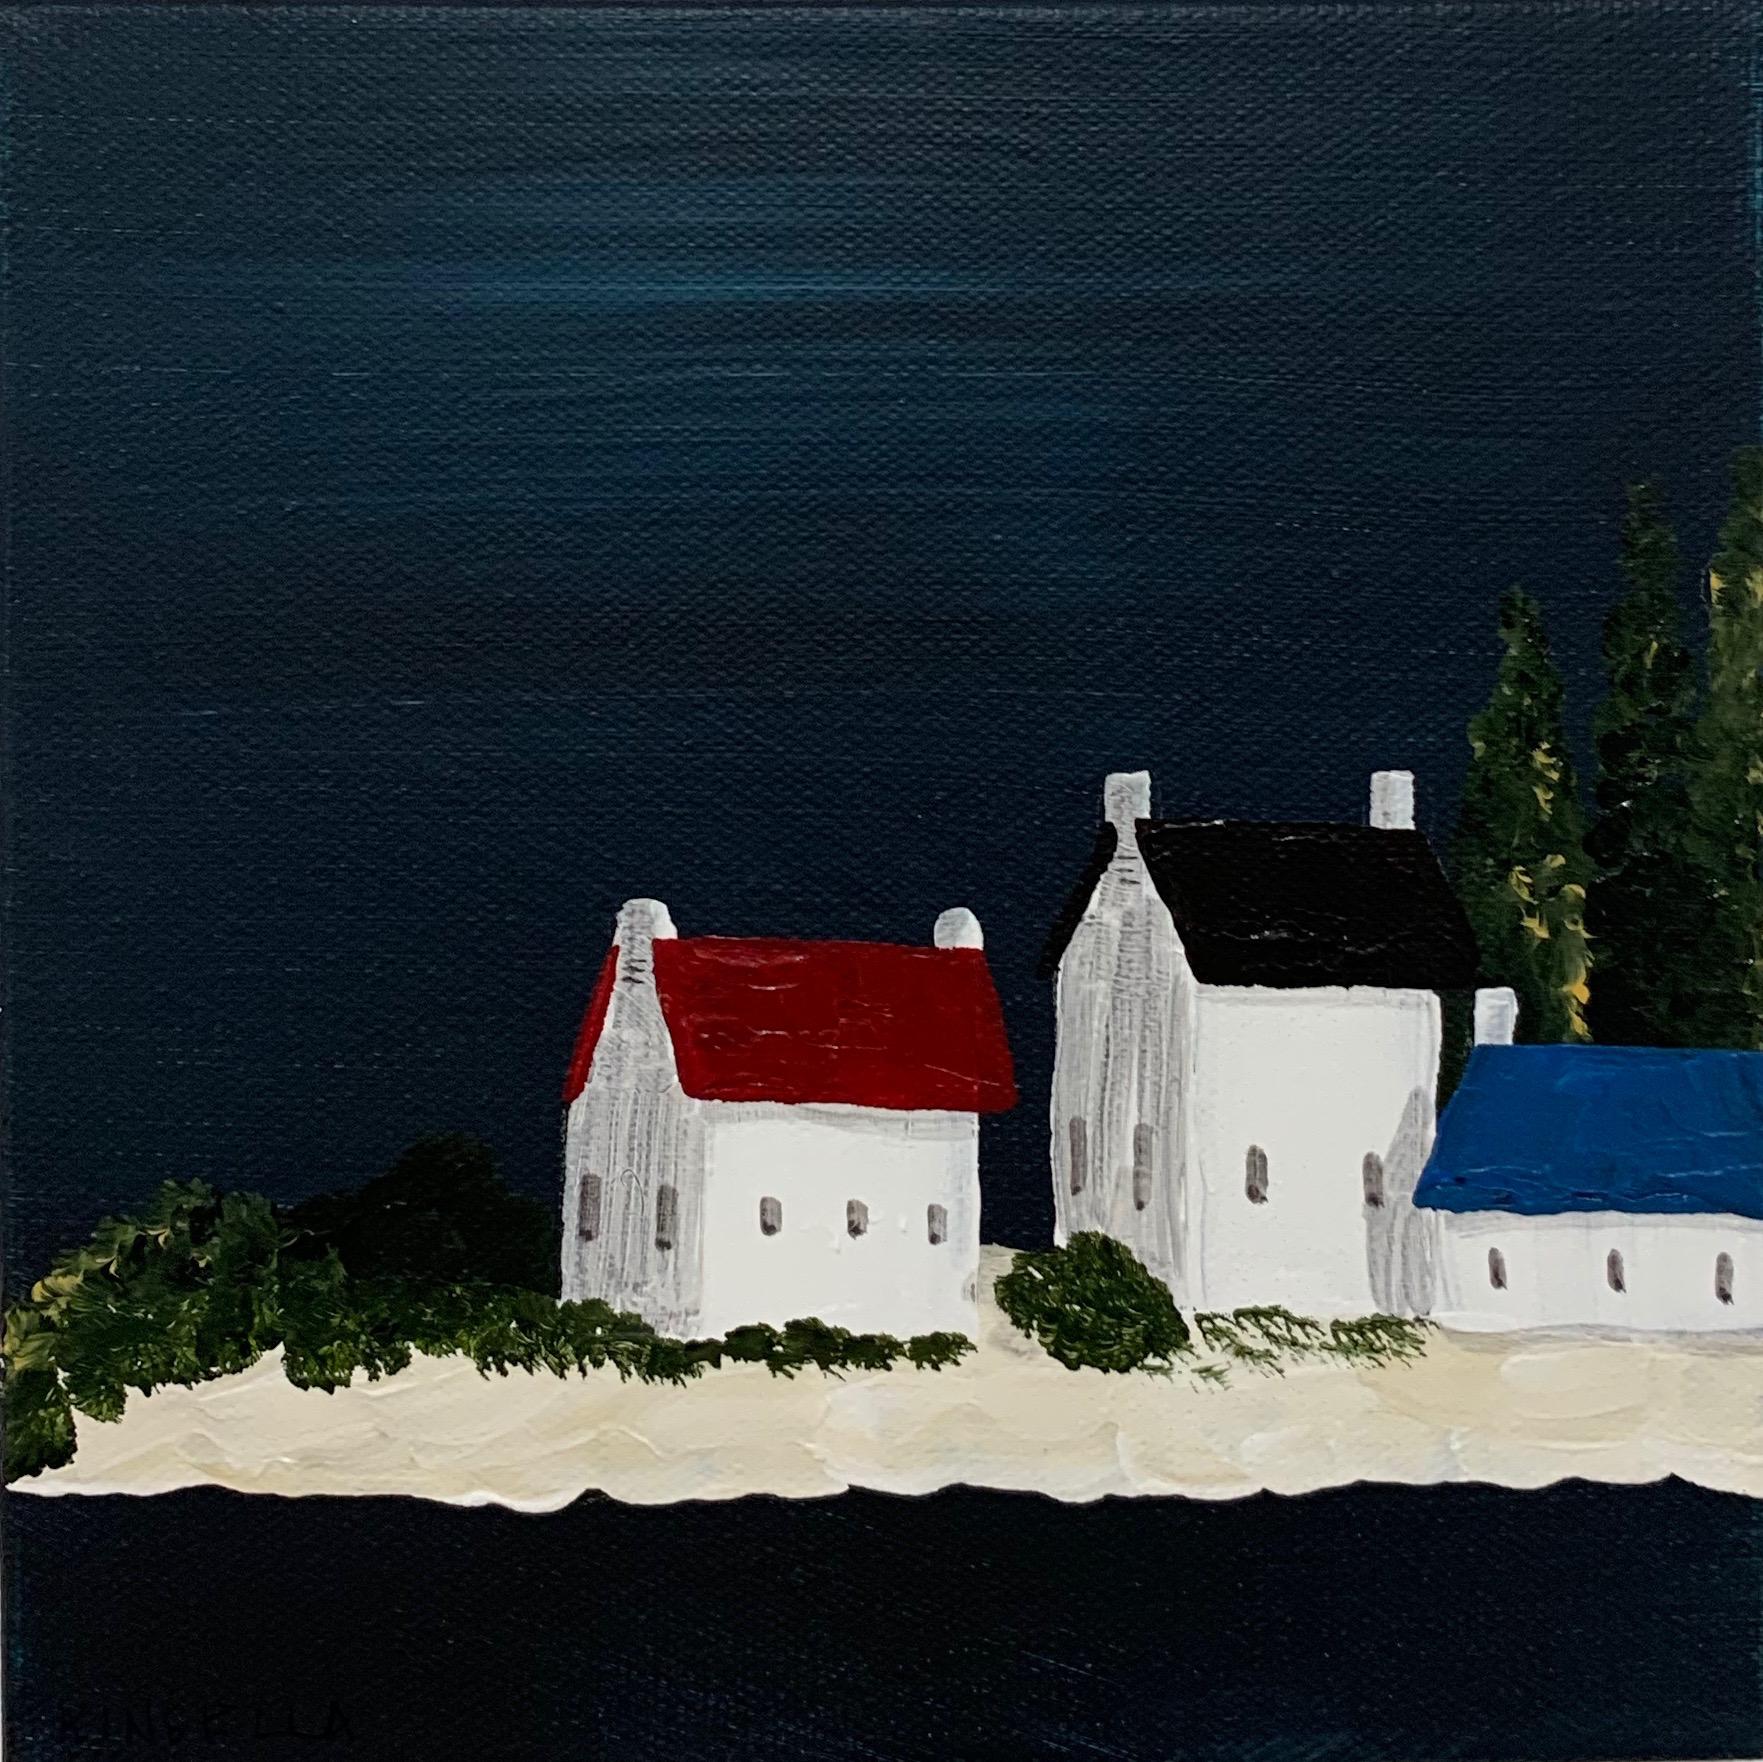 'Village VI' is a petite contemporary acrylic on canvas coastal painting of square format, created by American artist Susan Kinsella in 2019. Featuring a strong palette made of dark blue grey, black, white and beige colors accented with touches of